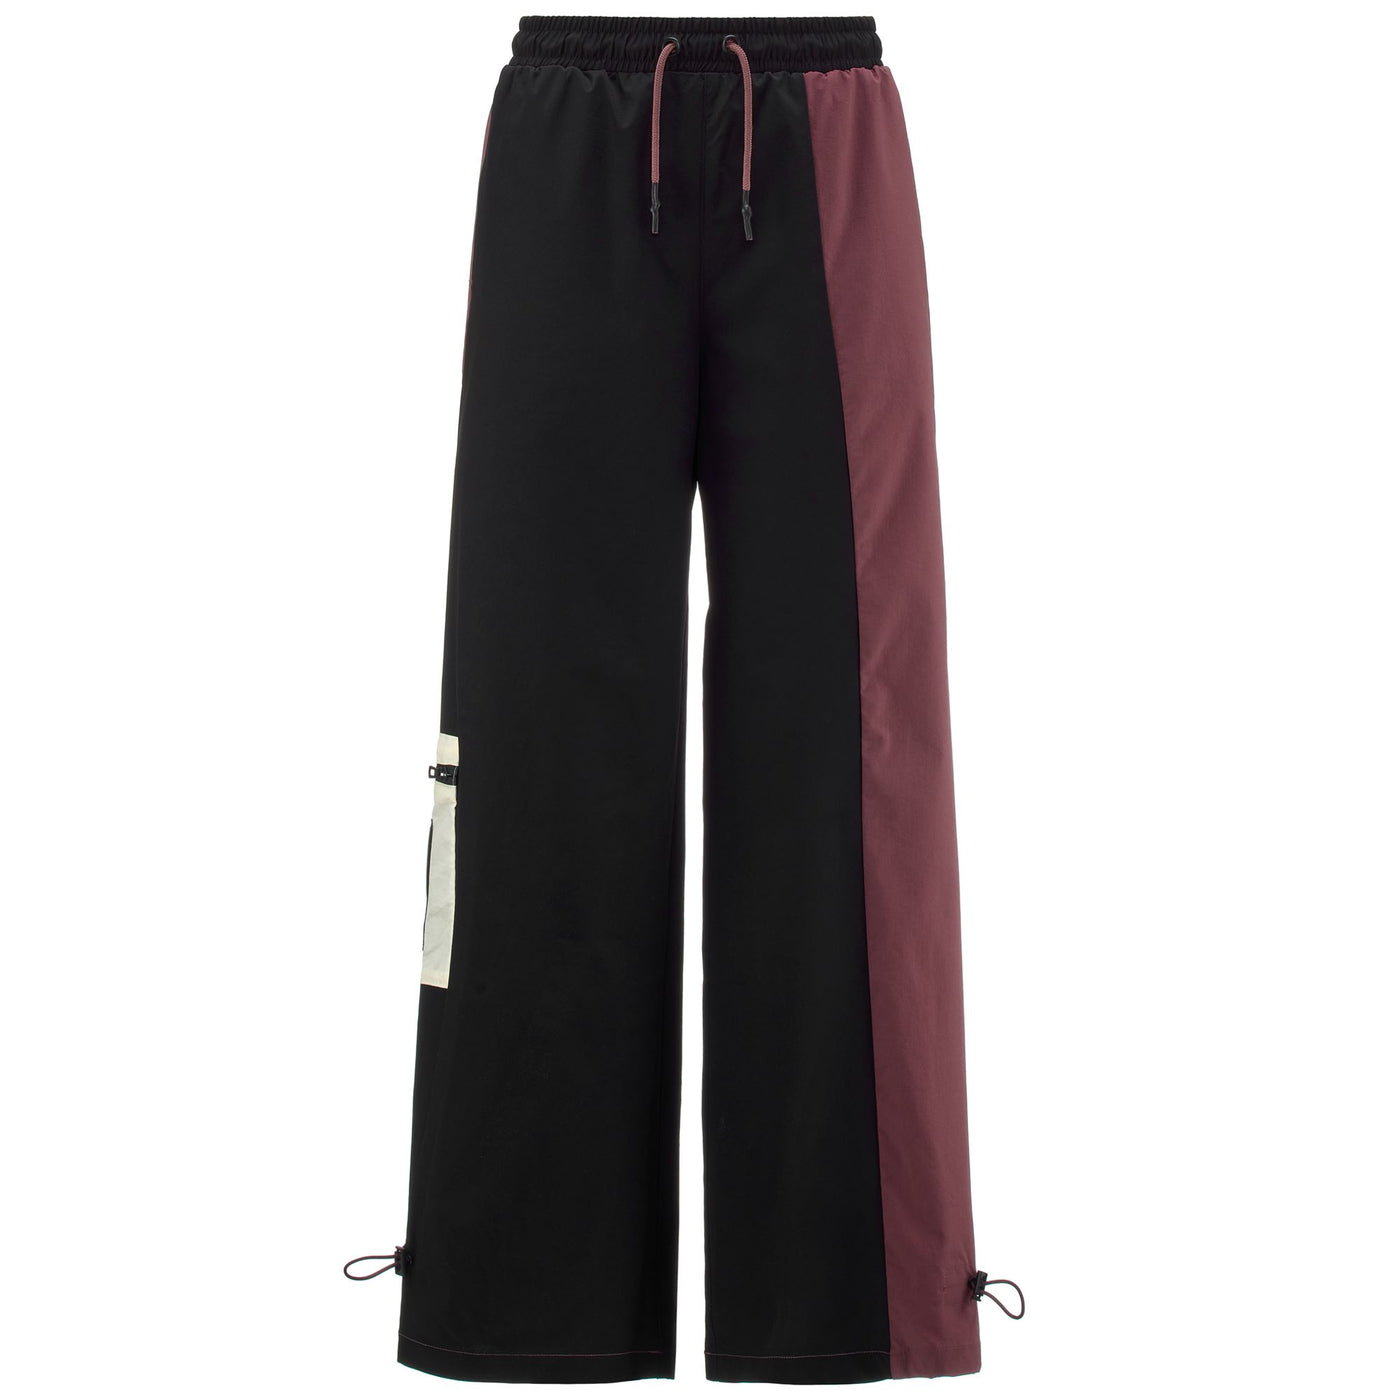 Pants Woman AUTHENTIC TIER ONE LARA Sport Trousers BLACK-RED FADED-WHITE ANTIQUE | kappa Photo (jpg Rgb)			